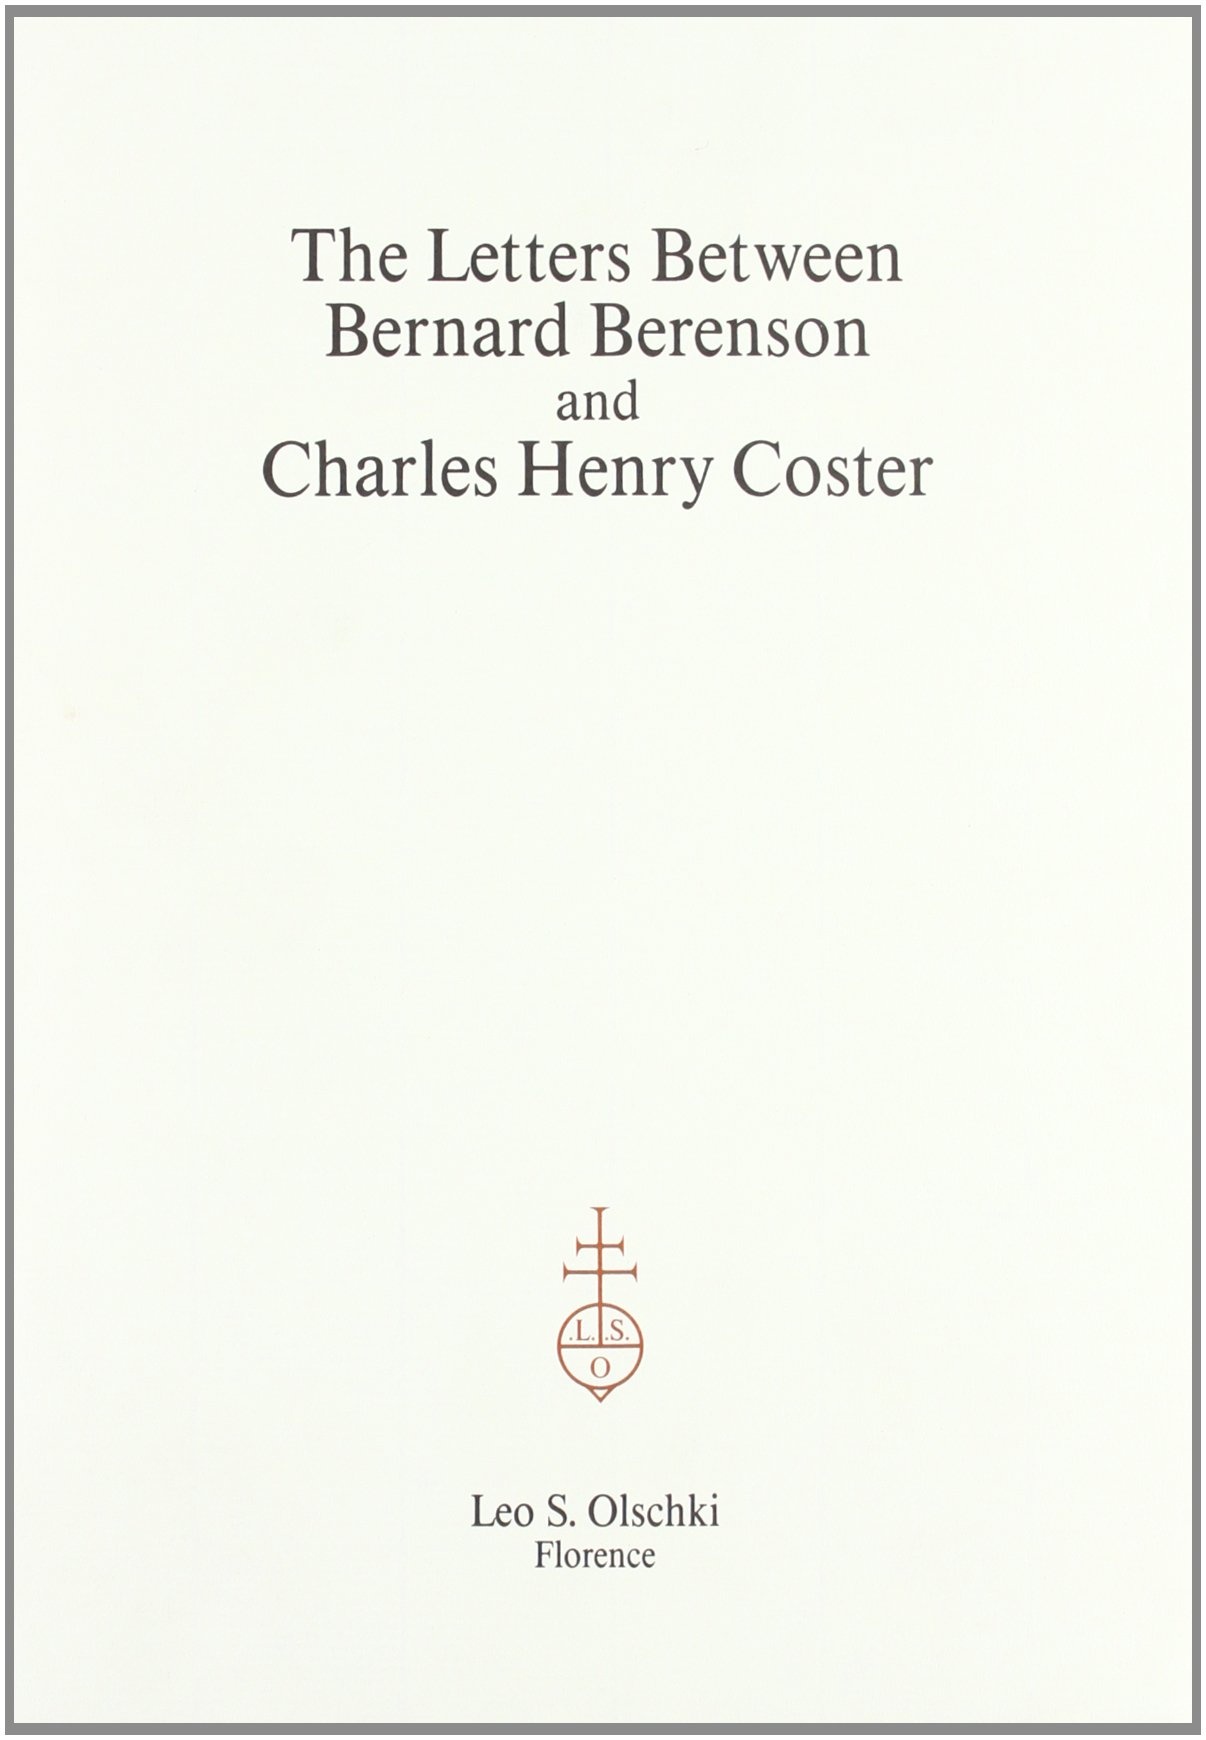 The Letters Between Bernard Berenson and Charles Henry Coster